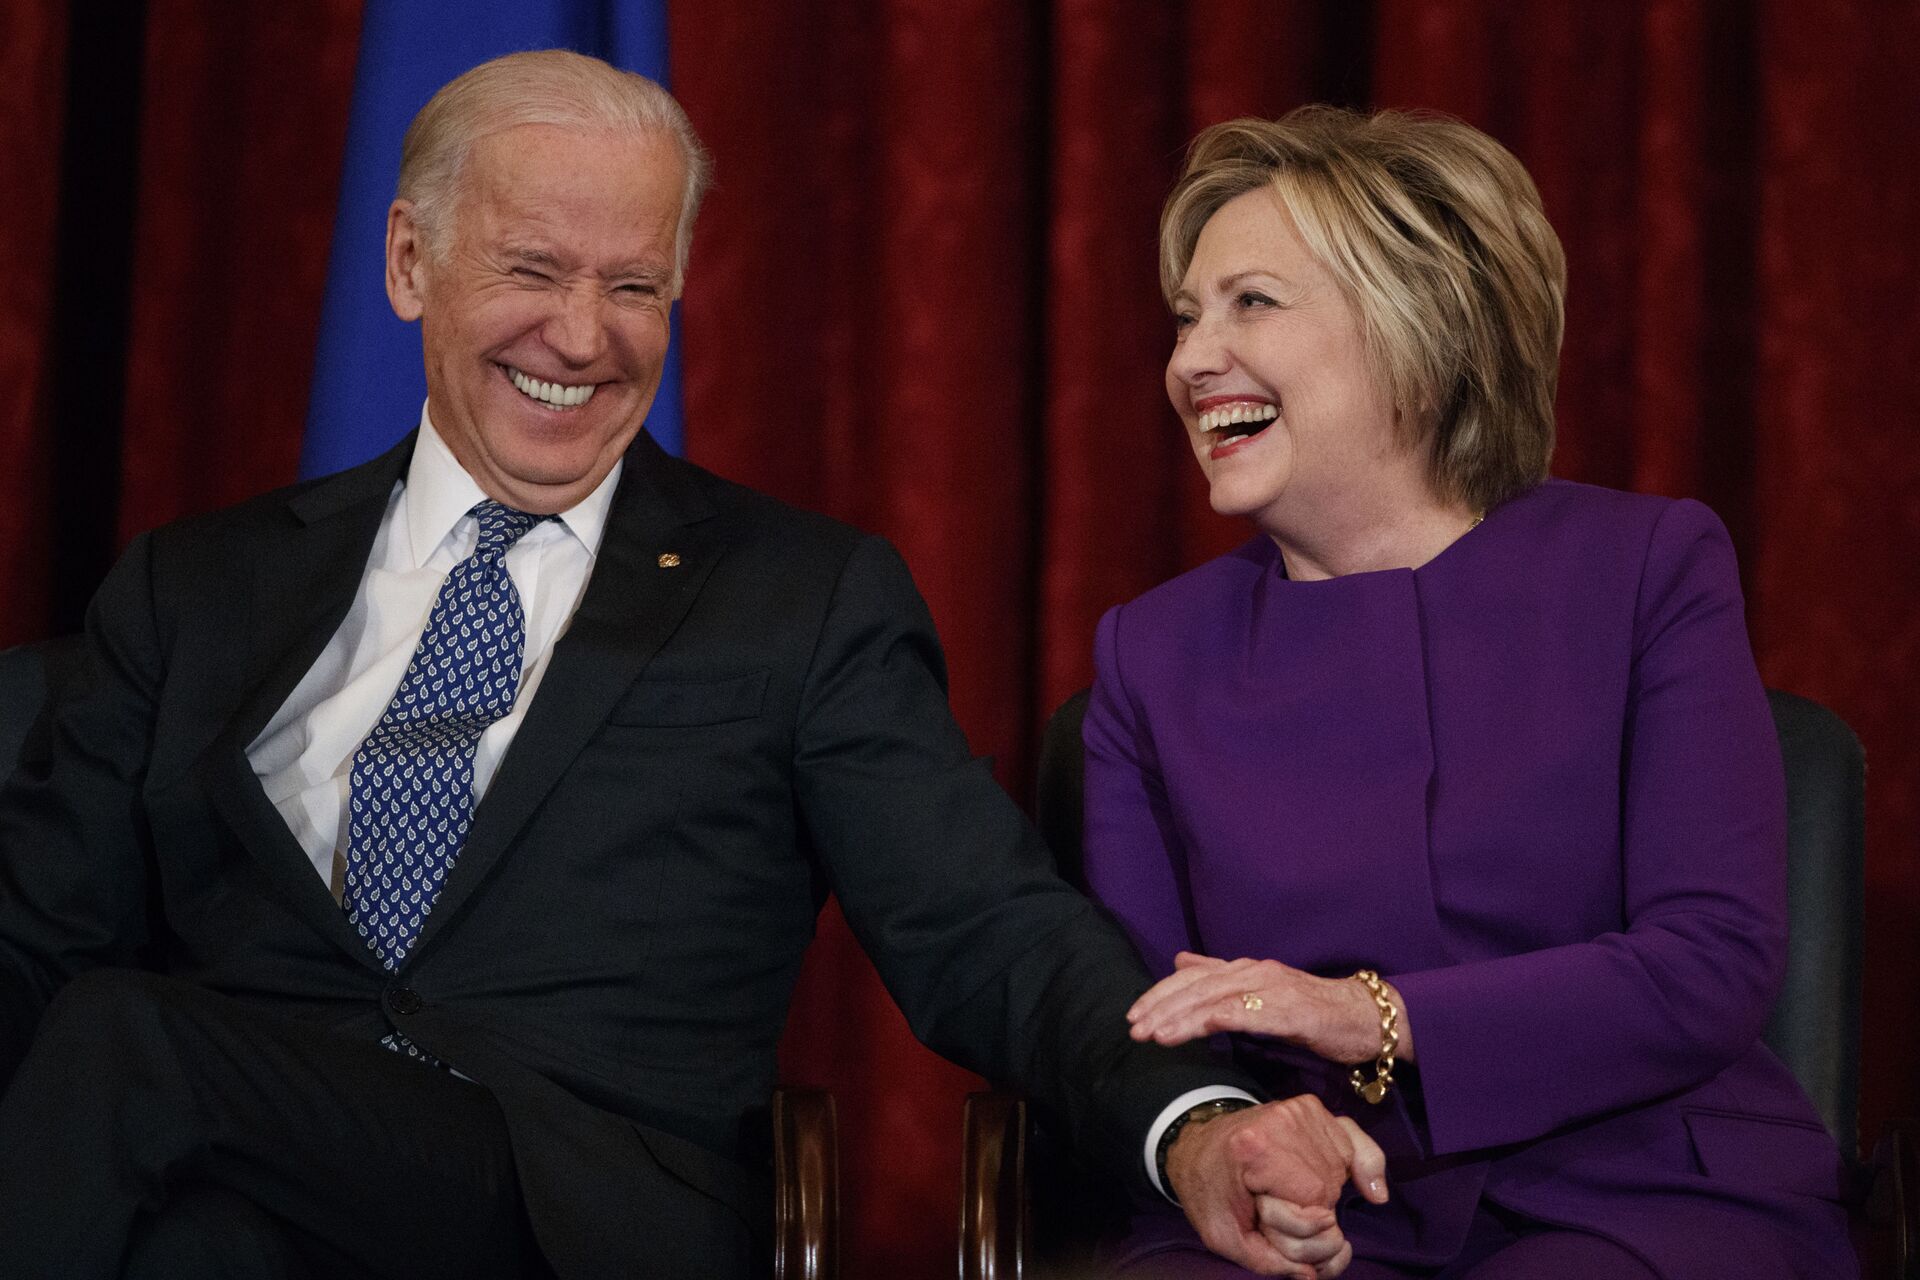 Trump Believed Dems Would Switch Biden for Clinton, Obama as 2020 Presidential Nominee, Claims Book - Sputnik International, 1920, 08.06.2021